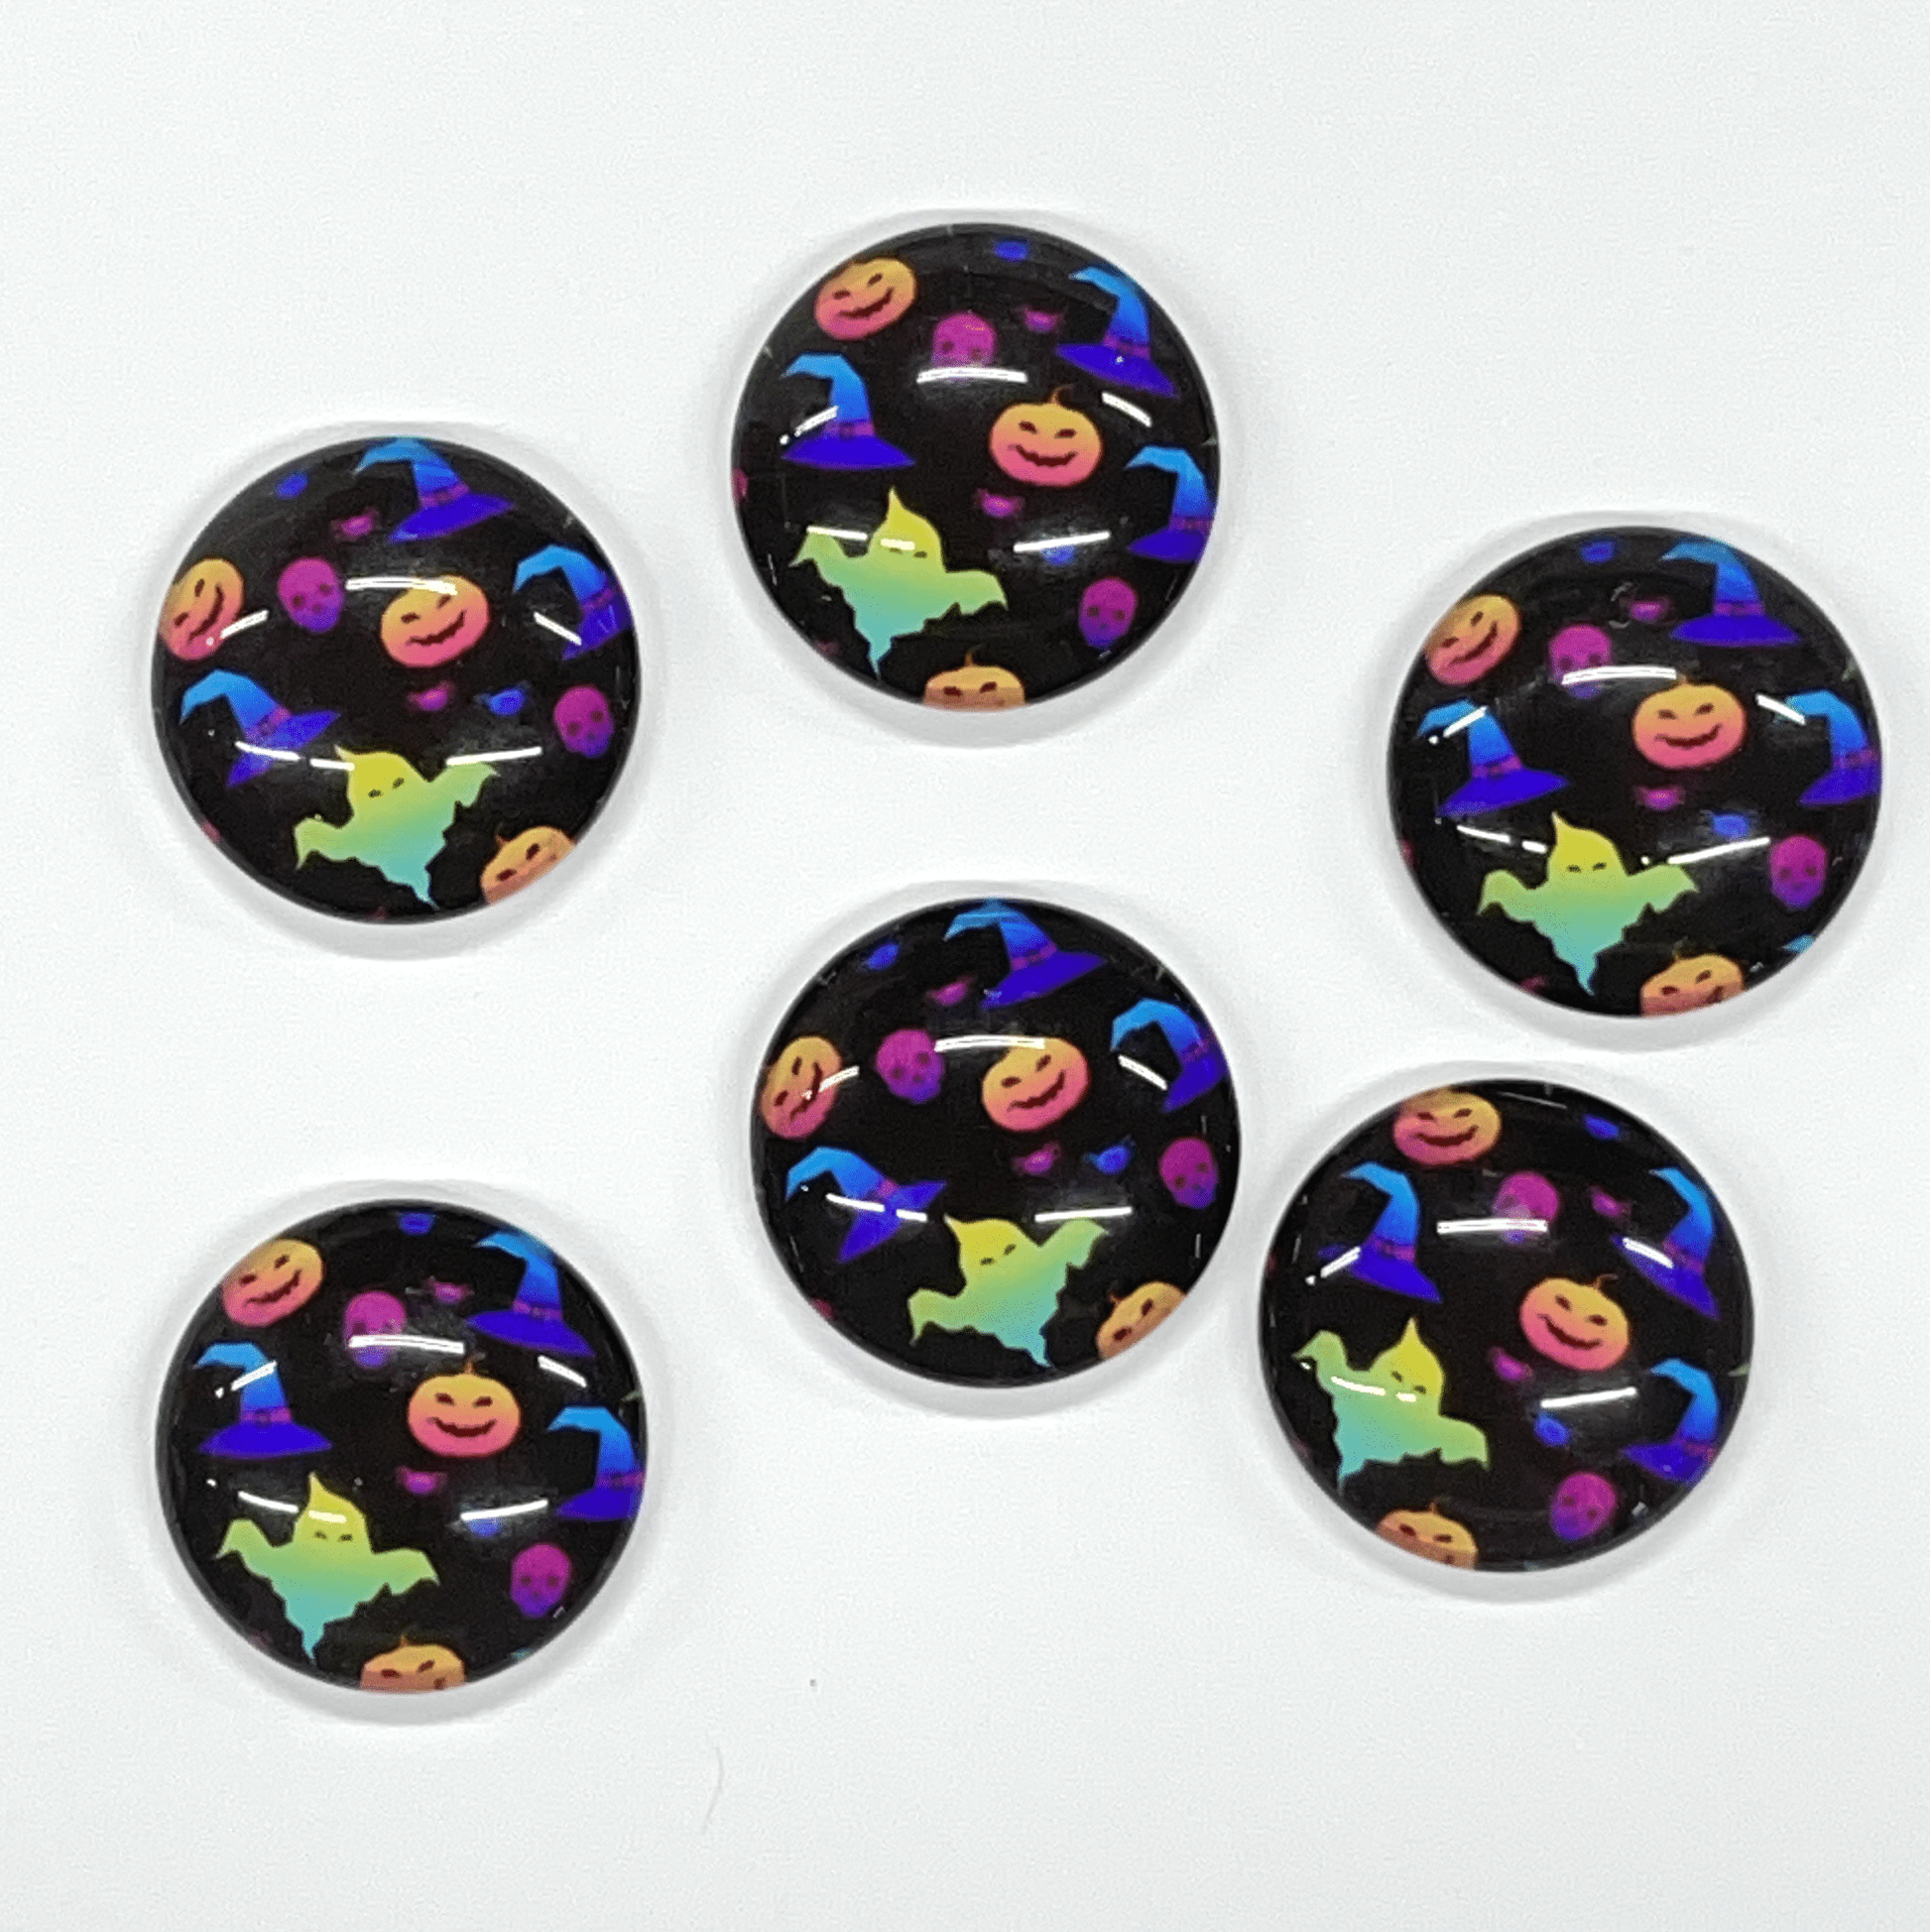 Sundaylace Creations & Bling Resin Gems 18mm "Neon Halloween" on black background round, Glue on Acrylic Printed Resin Gem (Sold in Pair)